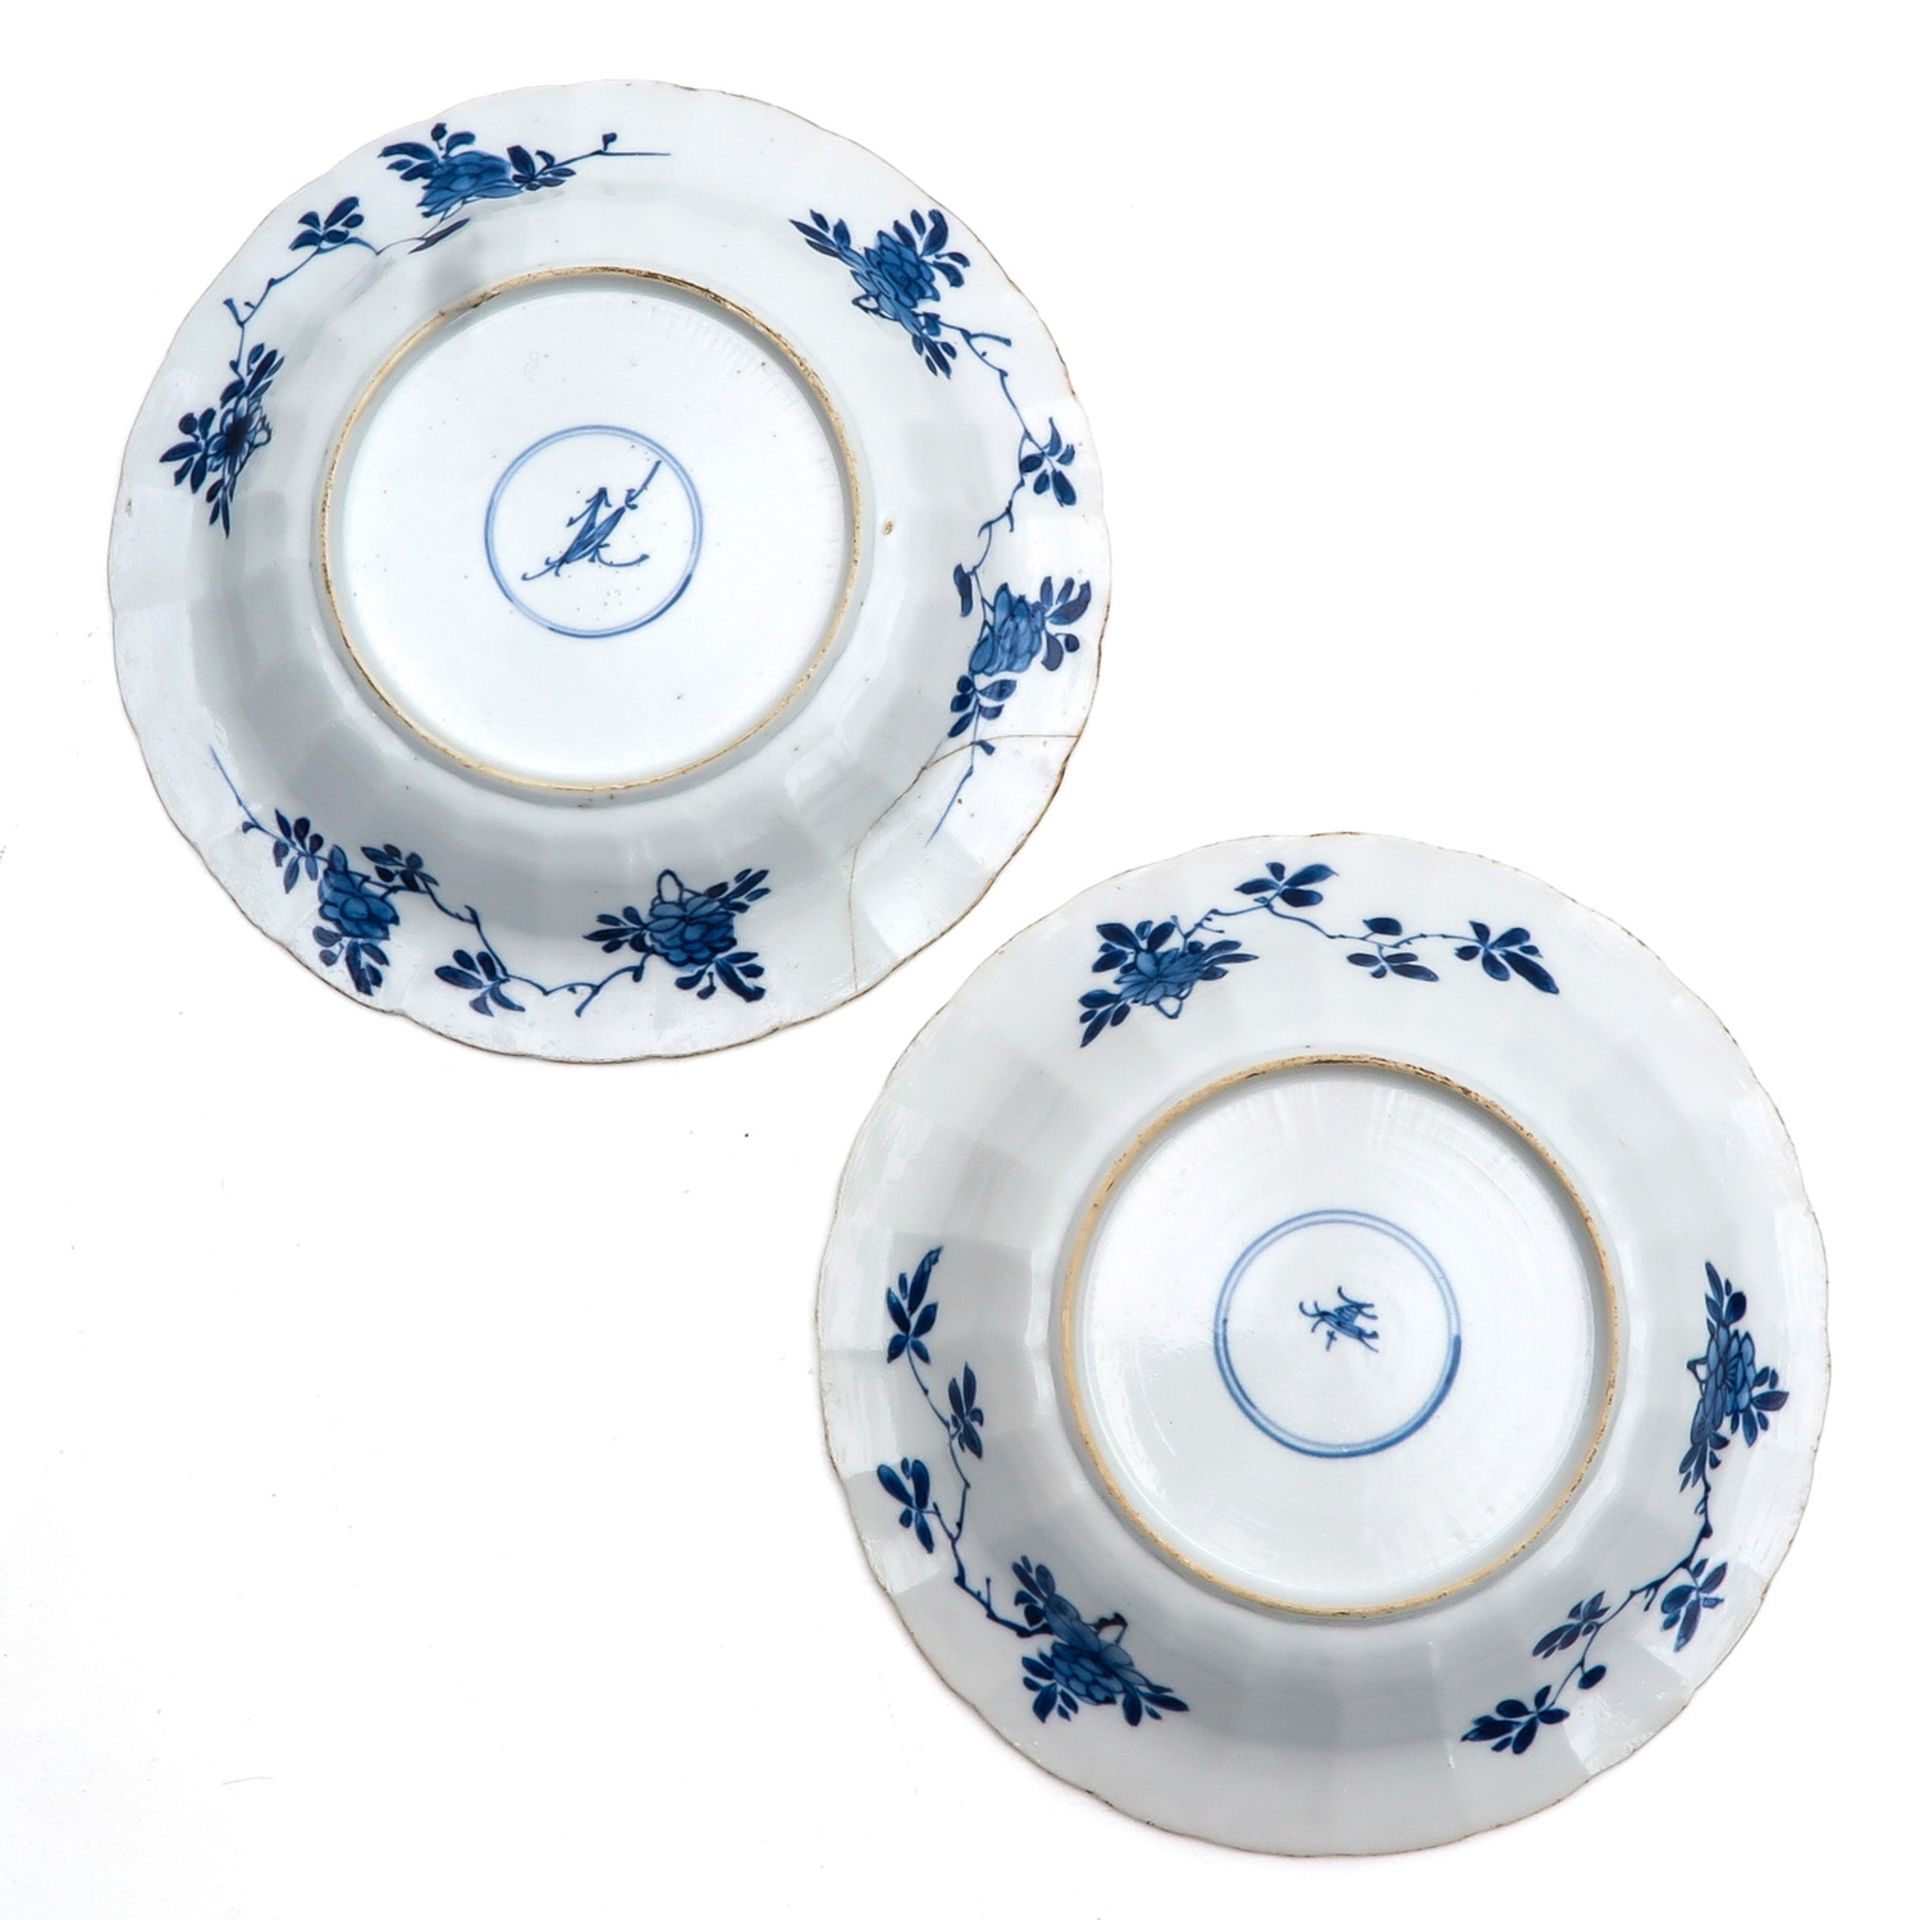 A Series of 4 Blue and White Plates - Image 4 of 9